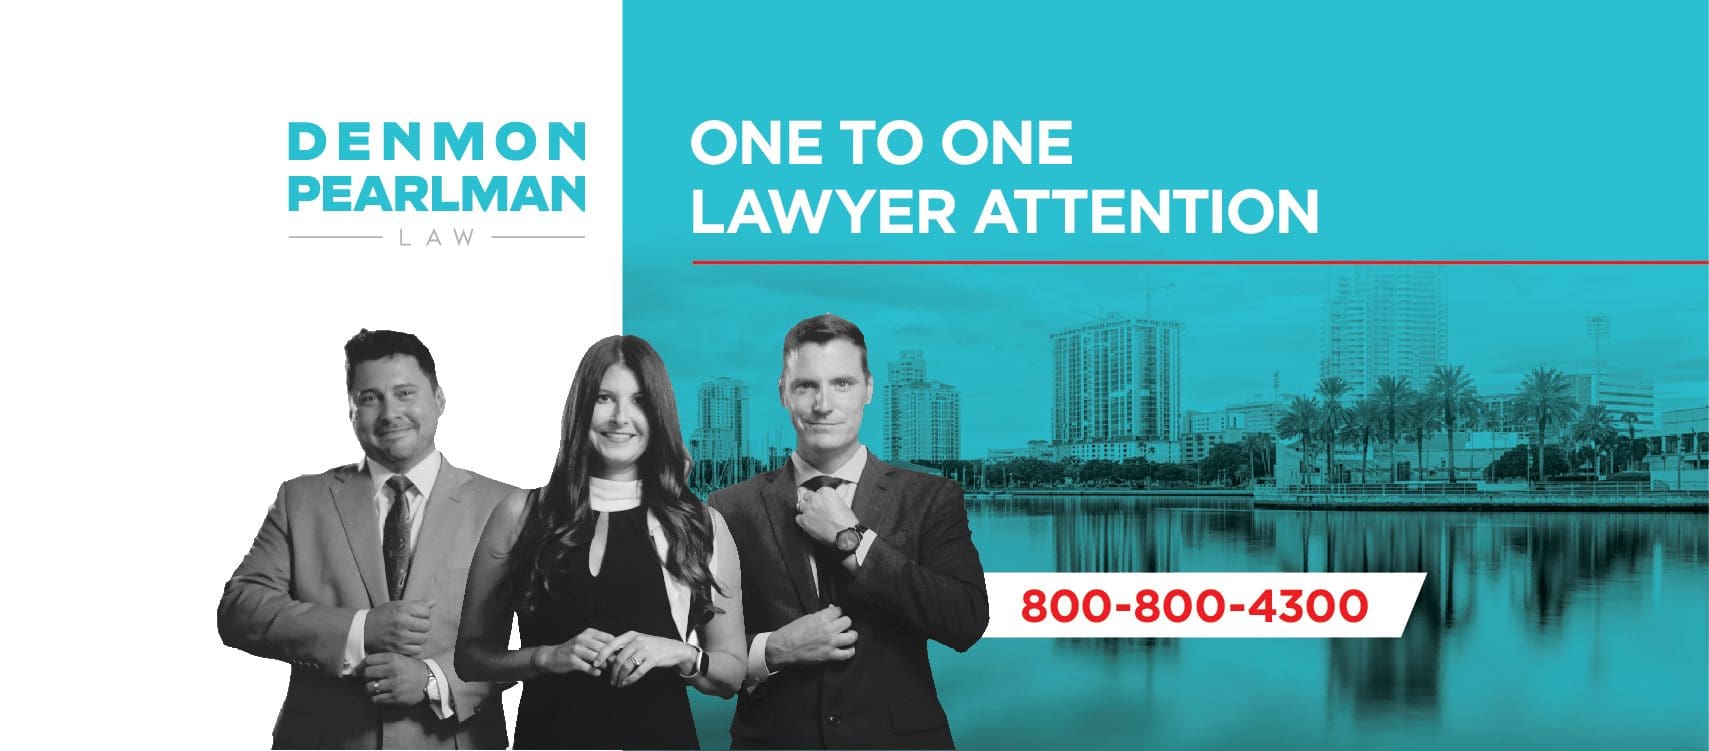 Denmon Pearlman Law Injury and Accident Attorneys - New Port Richey, FL, US, slip and fall